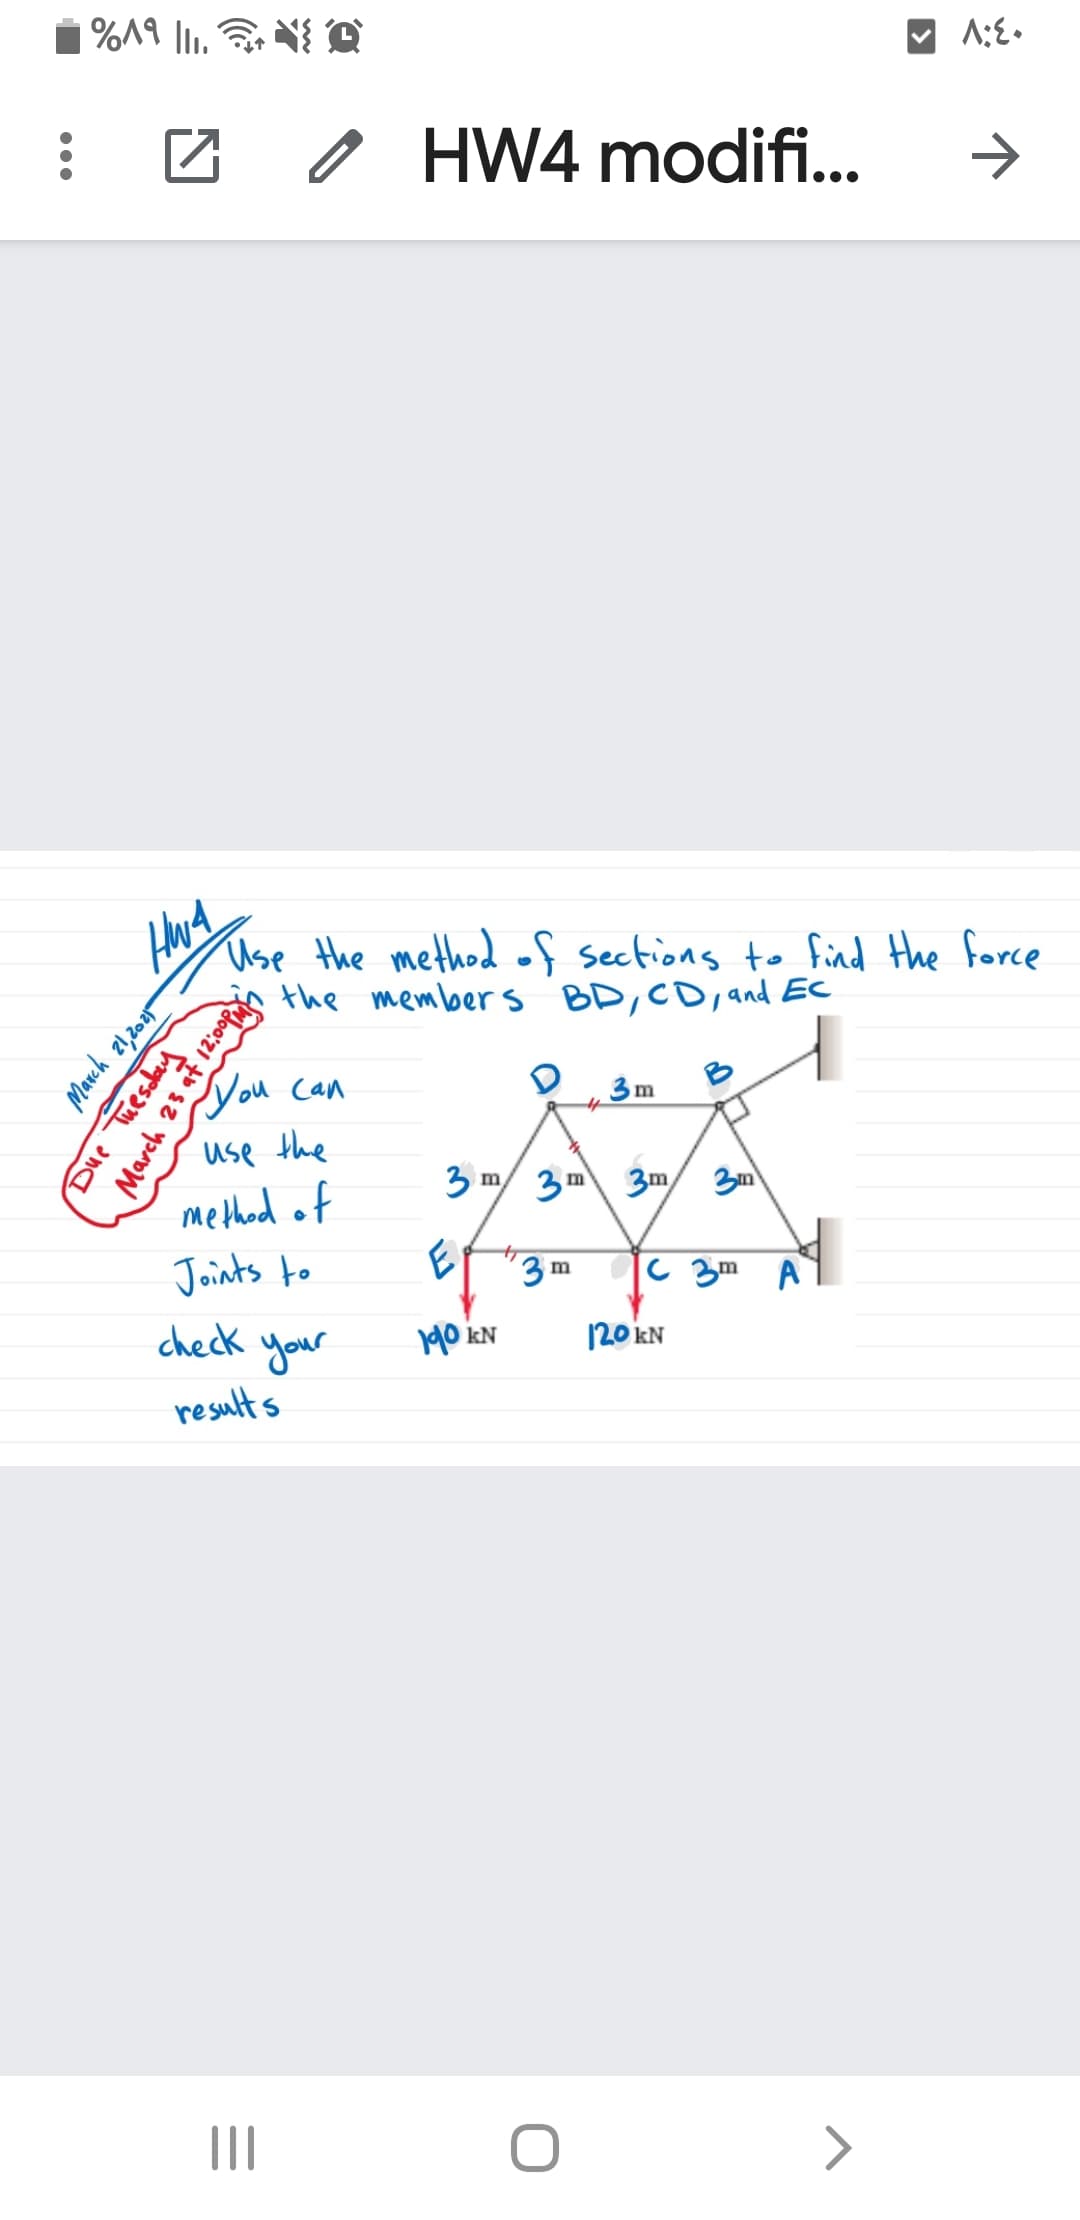 HW4 modifi..
Use the method of sections to find the force
the member s BD,CD, and EC
Jou
you Can
use the
3m
m
method of
3 m
3m
Joints to
check your
3m
c 3m A
190 kN
120 kN
results
March 21,2005
Due Tuesday
March 23 at 12:0op
